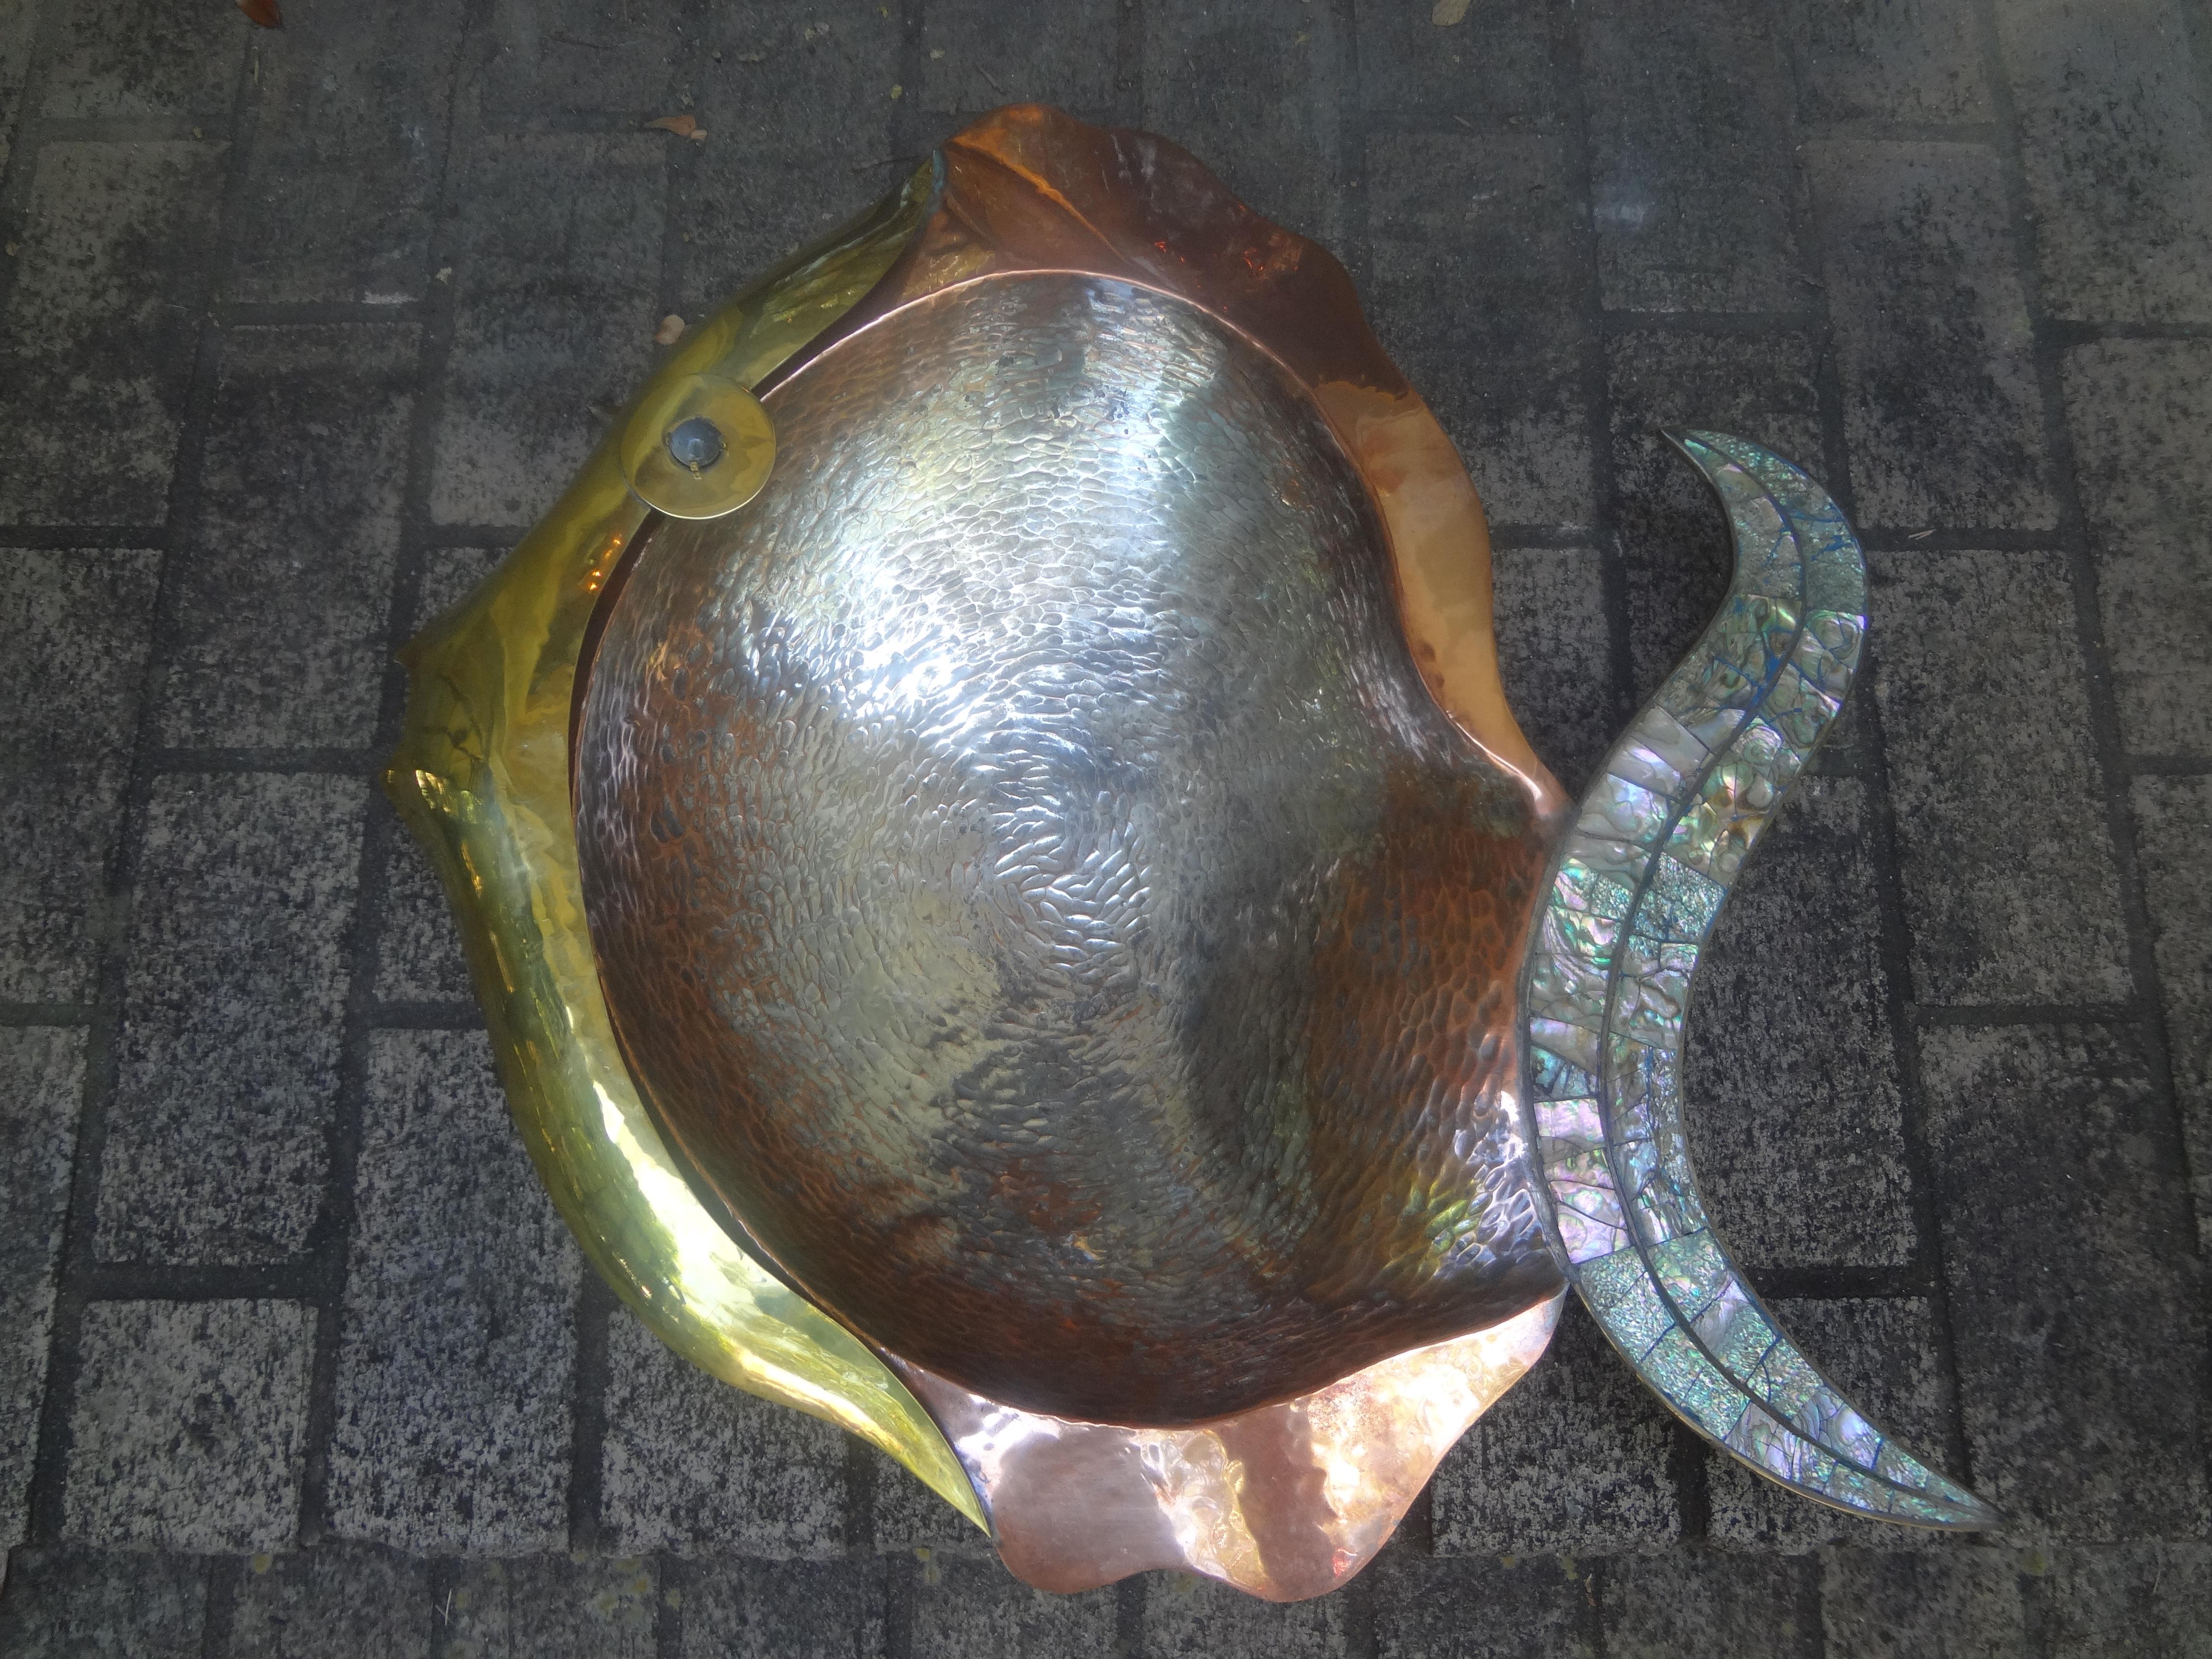 Mexican Modernist Mixed Metal And Abalone Fish Bowl .
Large Mexican modernist or Mexican mid century mixed metal and abalone fish bowl, dish or sculpture. This fabulous vintage Mexican modern bowl is expertly crafted in the style of Los Castillo of